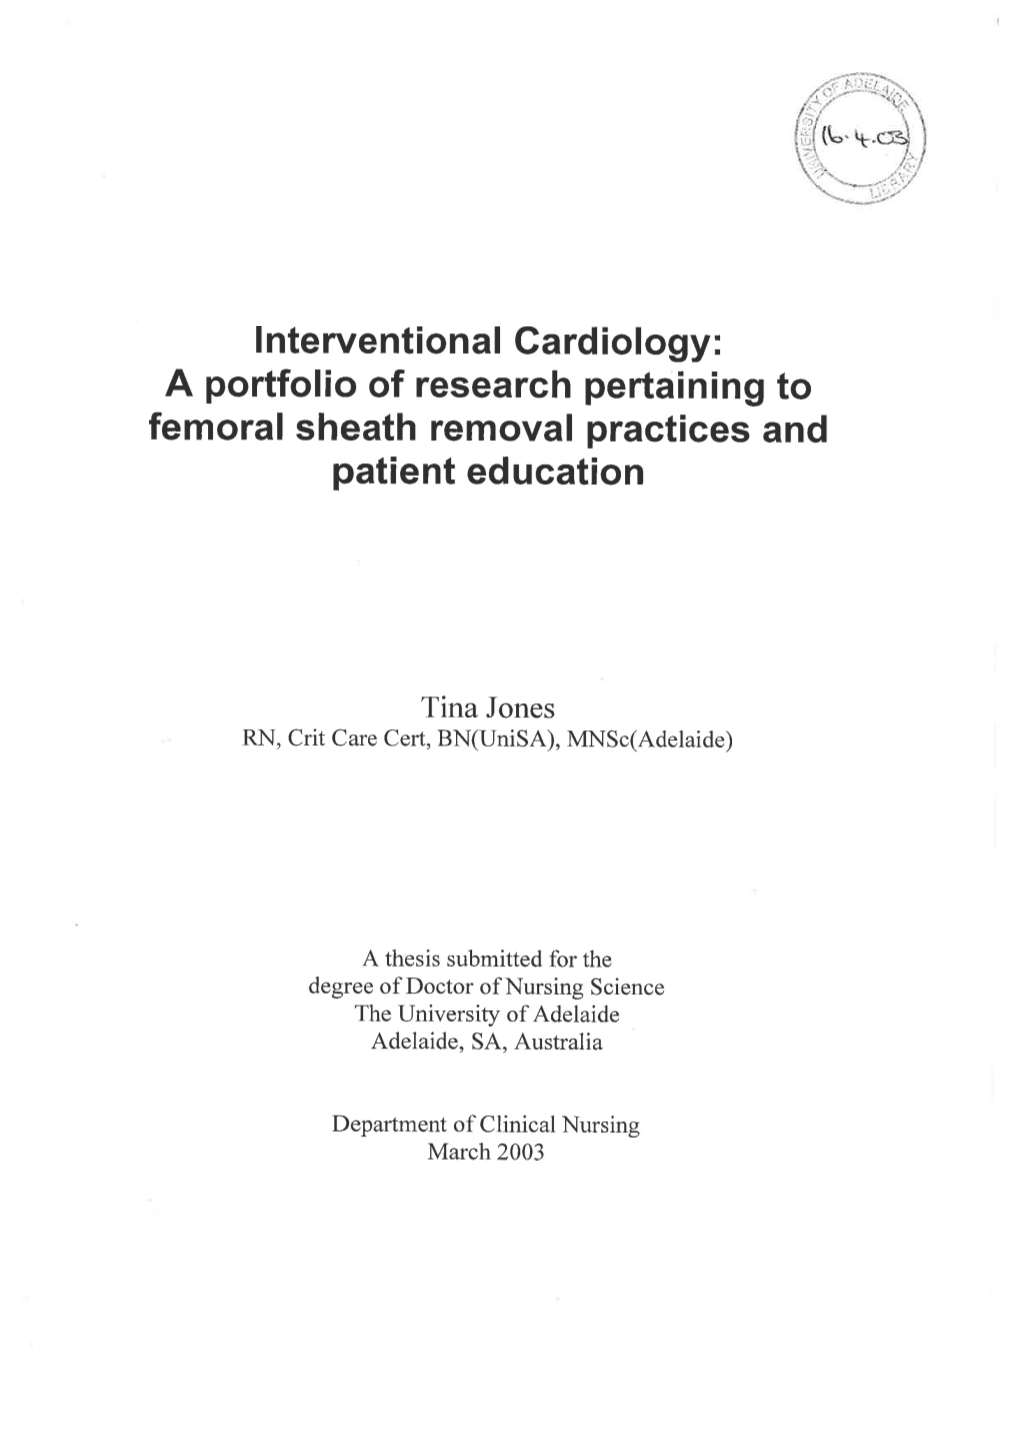 Interventional Cardiology: a Portfolio of Research Pertaining to Femoral